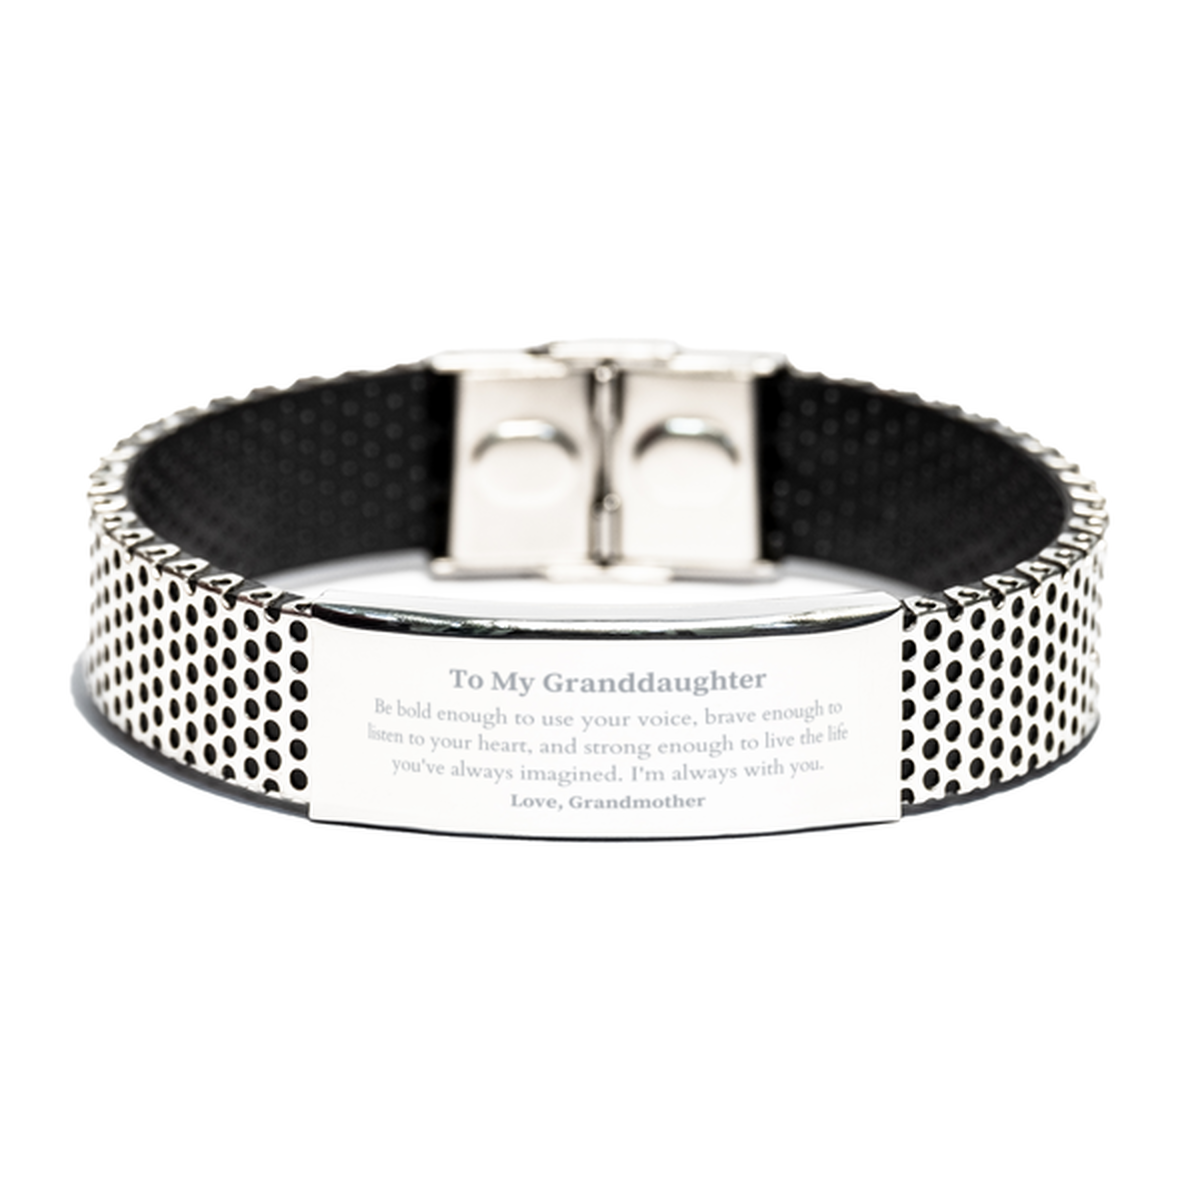 Keepsake Granddaughter Stainless Steel Bracelet Gift Idea Graduation Christmas Birthday Granddaughter from Grandmother, Granddaughter Be bold enough to use your voice, brave enough to listen to your heart. Love, Grandmother